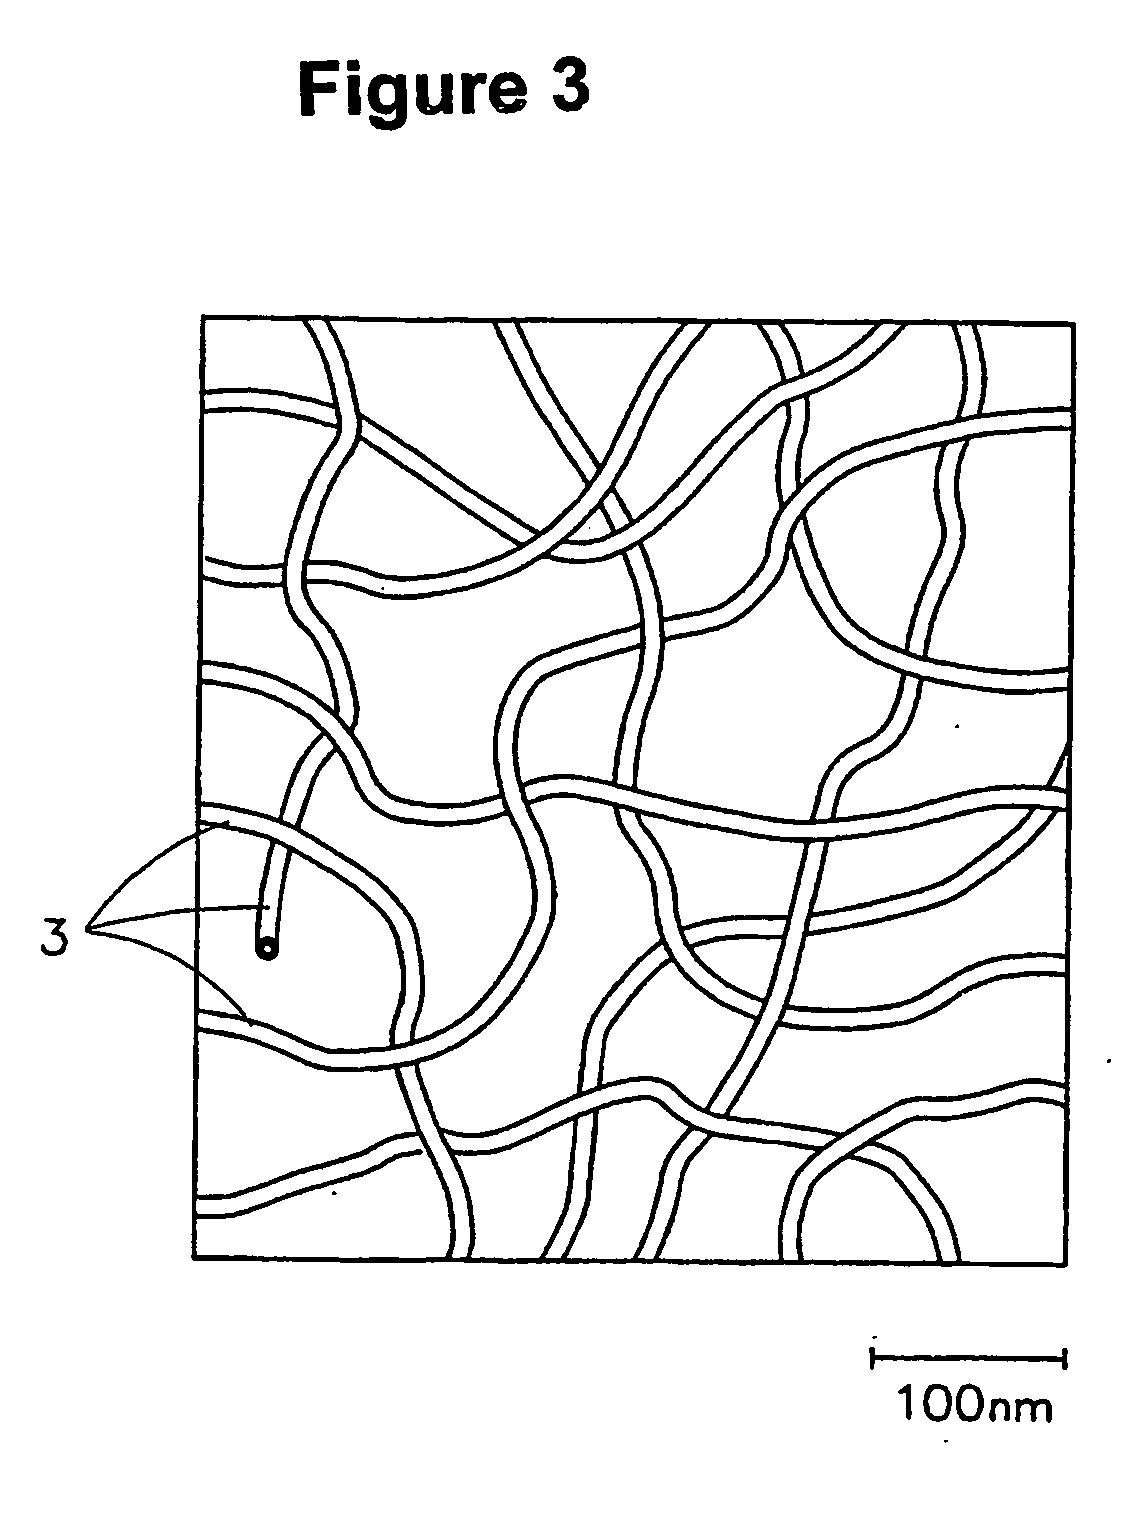 Articles with dispersed conductive coatings